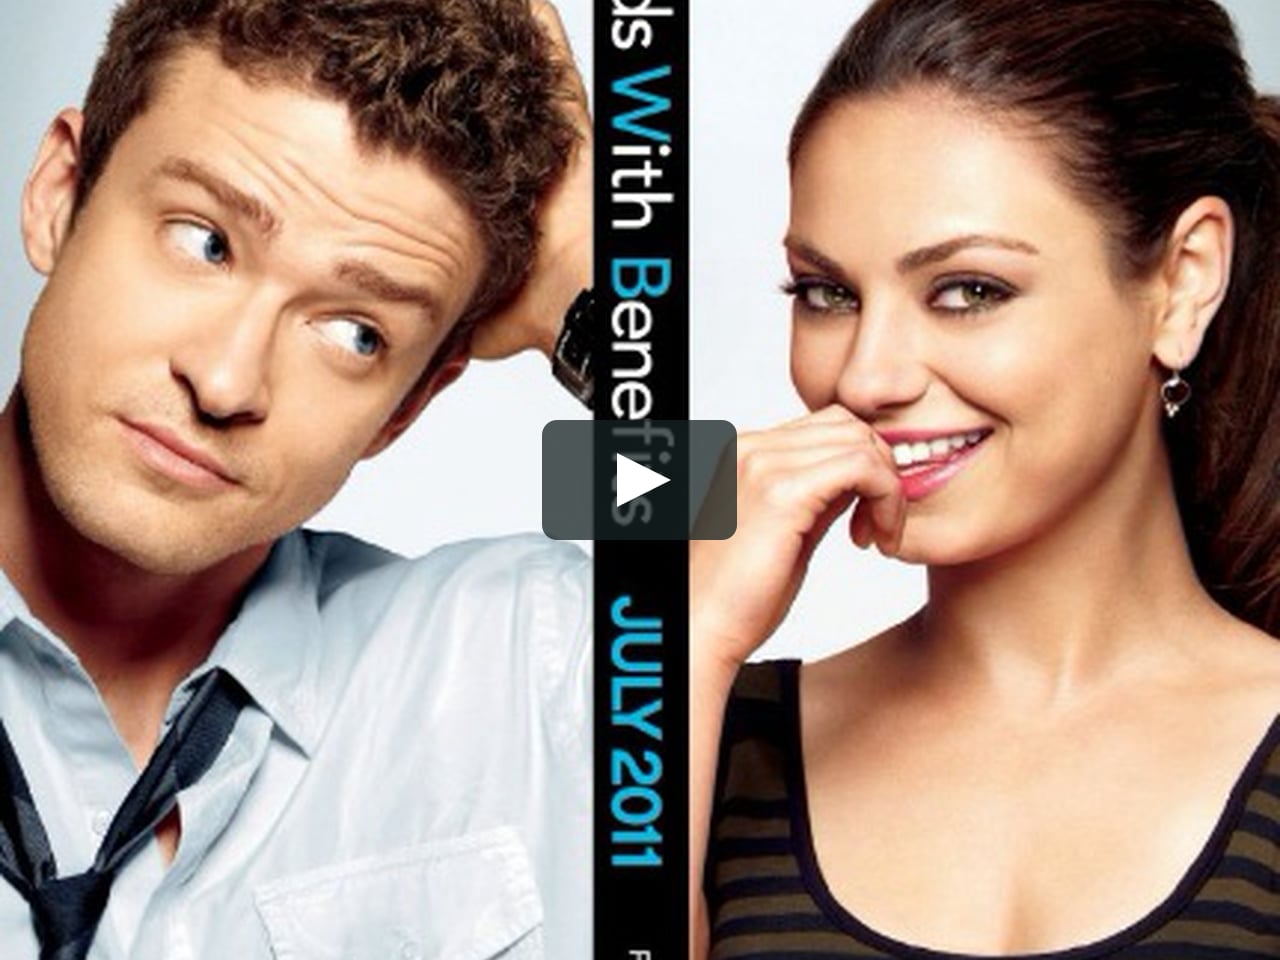 Friends With Benefits Backgrounds, Compatible - PC, Mobile, Gadgets| 1280x960 px